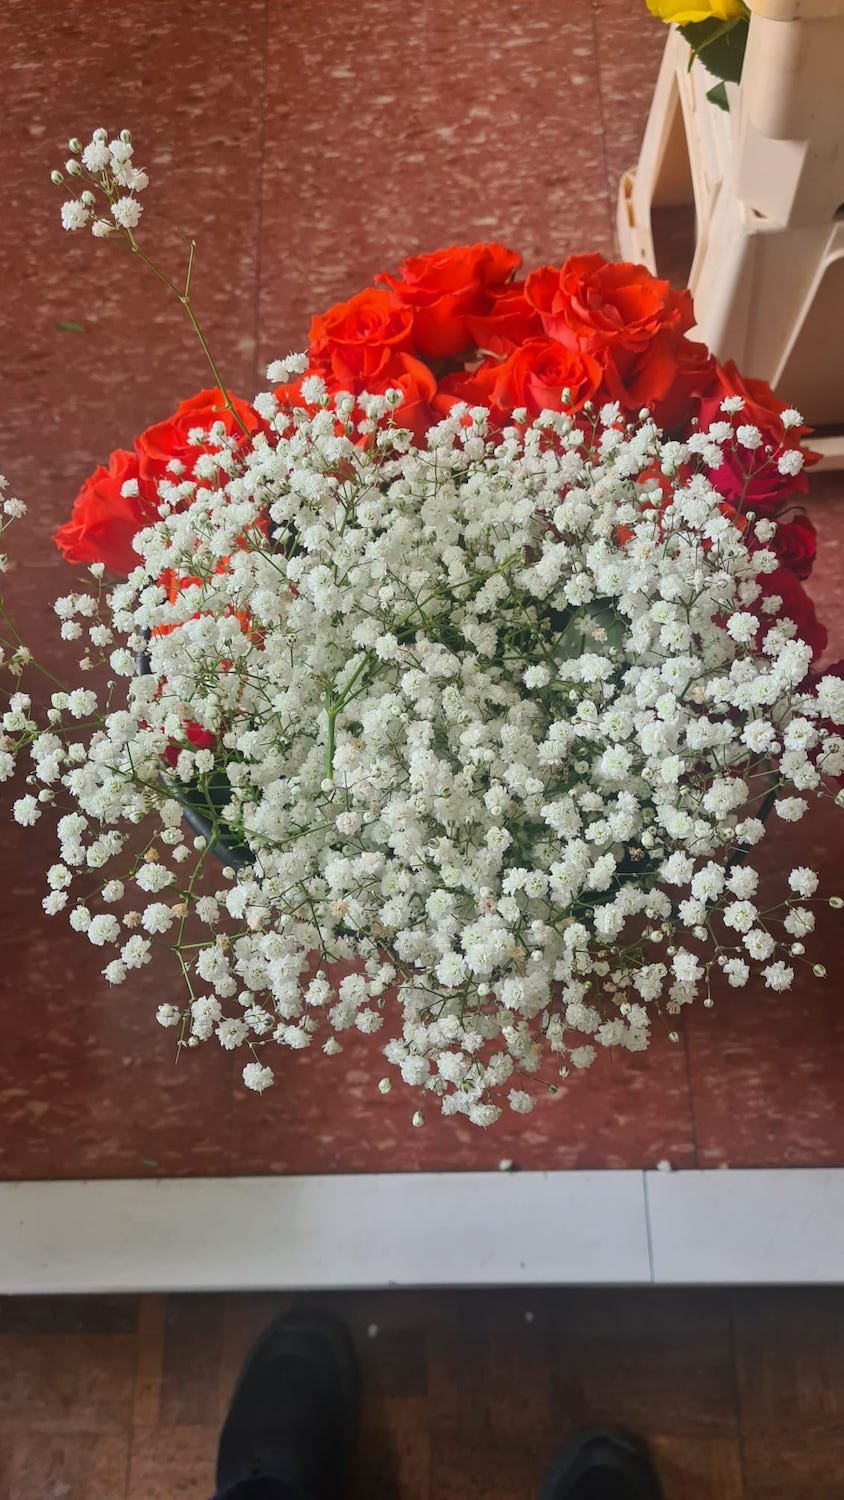 Red roses and gypsophila